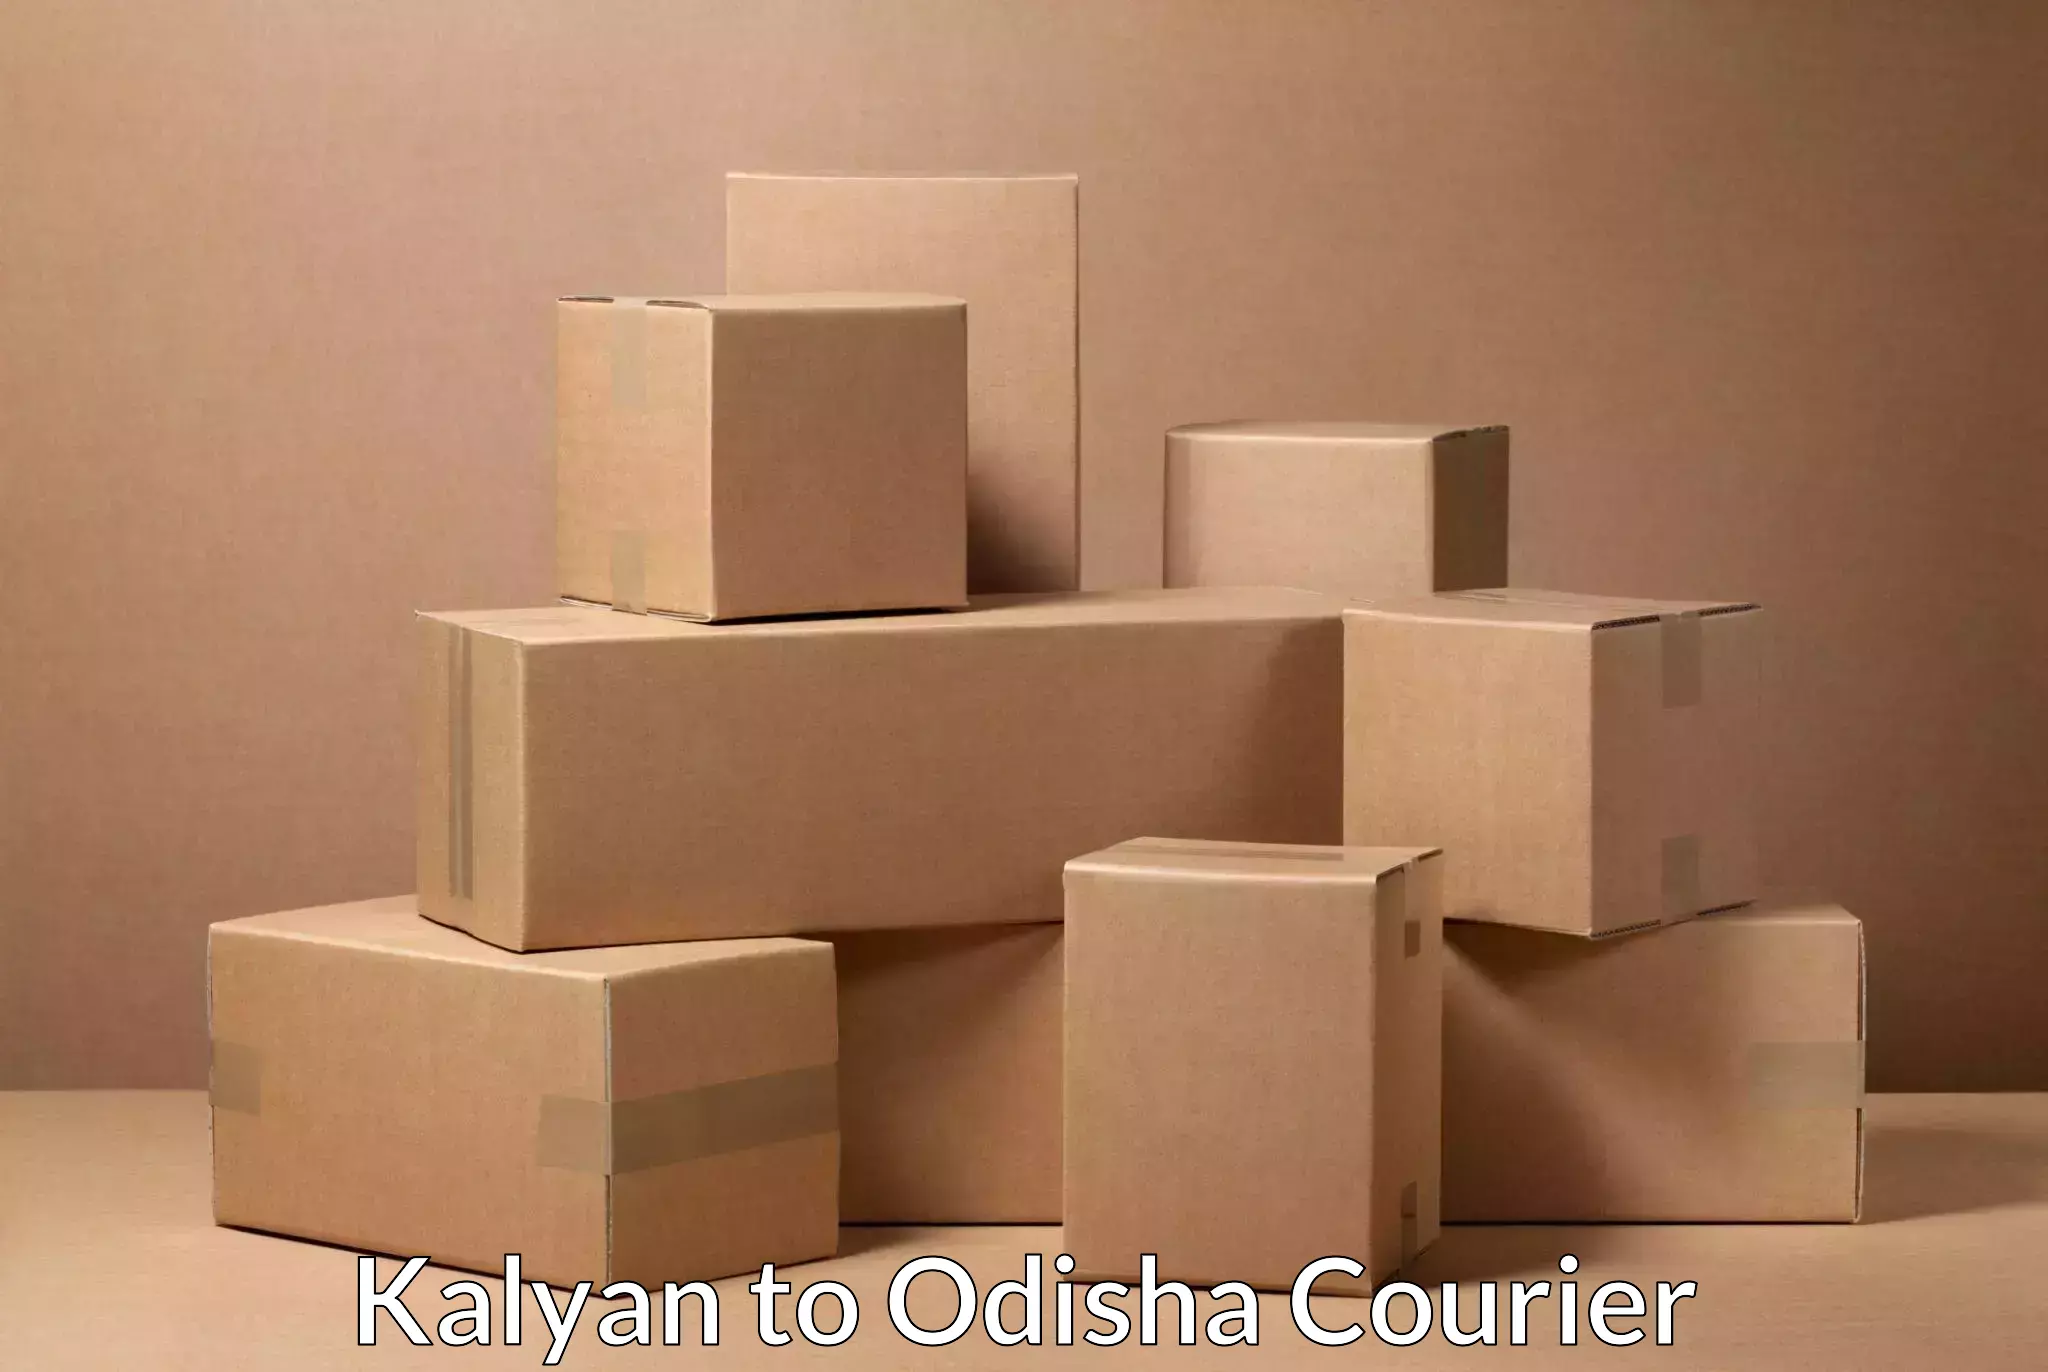 Large-scale shipping solutions Kalyan to Odisha